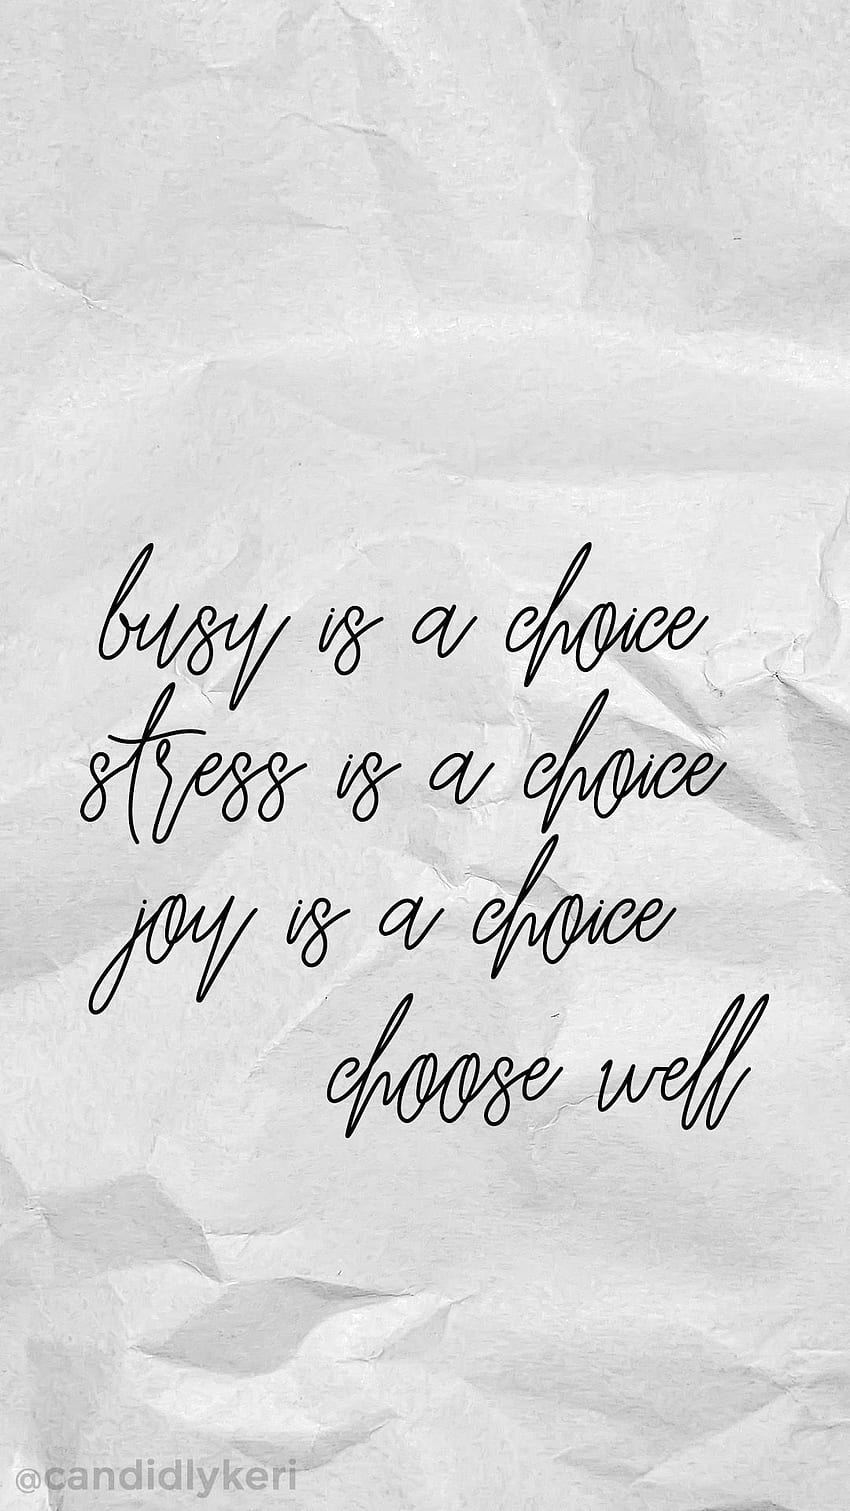 Busy is a choice stress is a choice joy is a choice choose well crinkled paper quote inspirational background wall. Quotes, Choices quotes, Manifestation quotes HD phone wallpaper